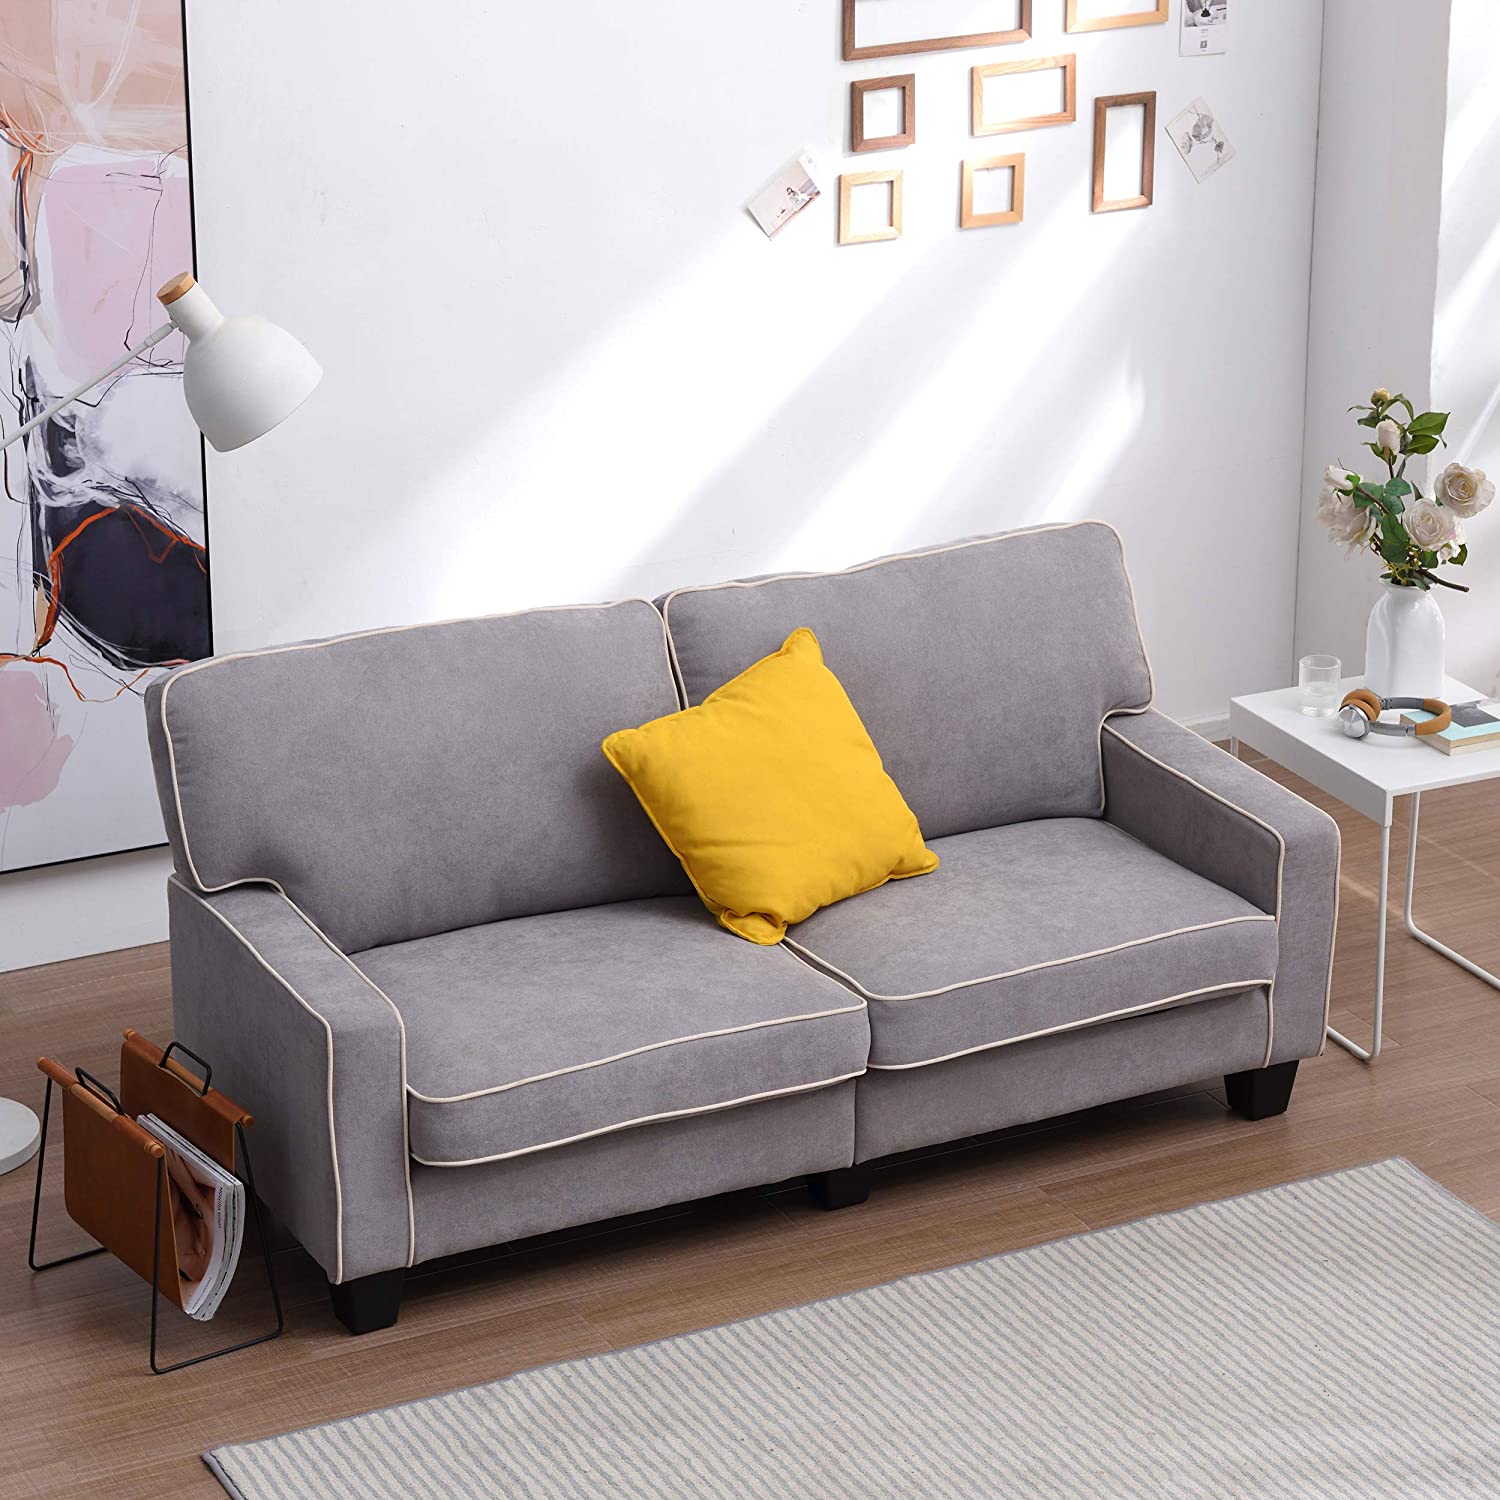 Sherbrook 3 Seater Fabric Sofa with Contrasting Trim in Light Grey Fabric